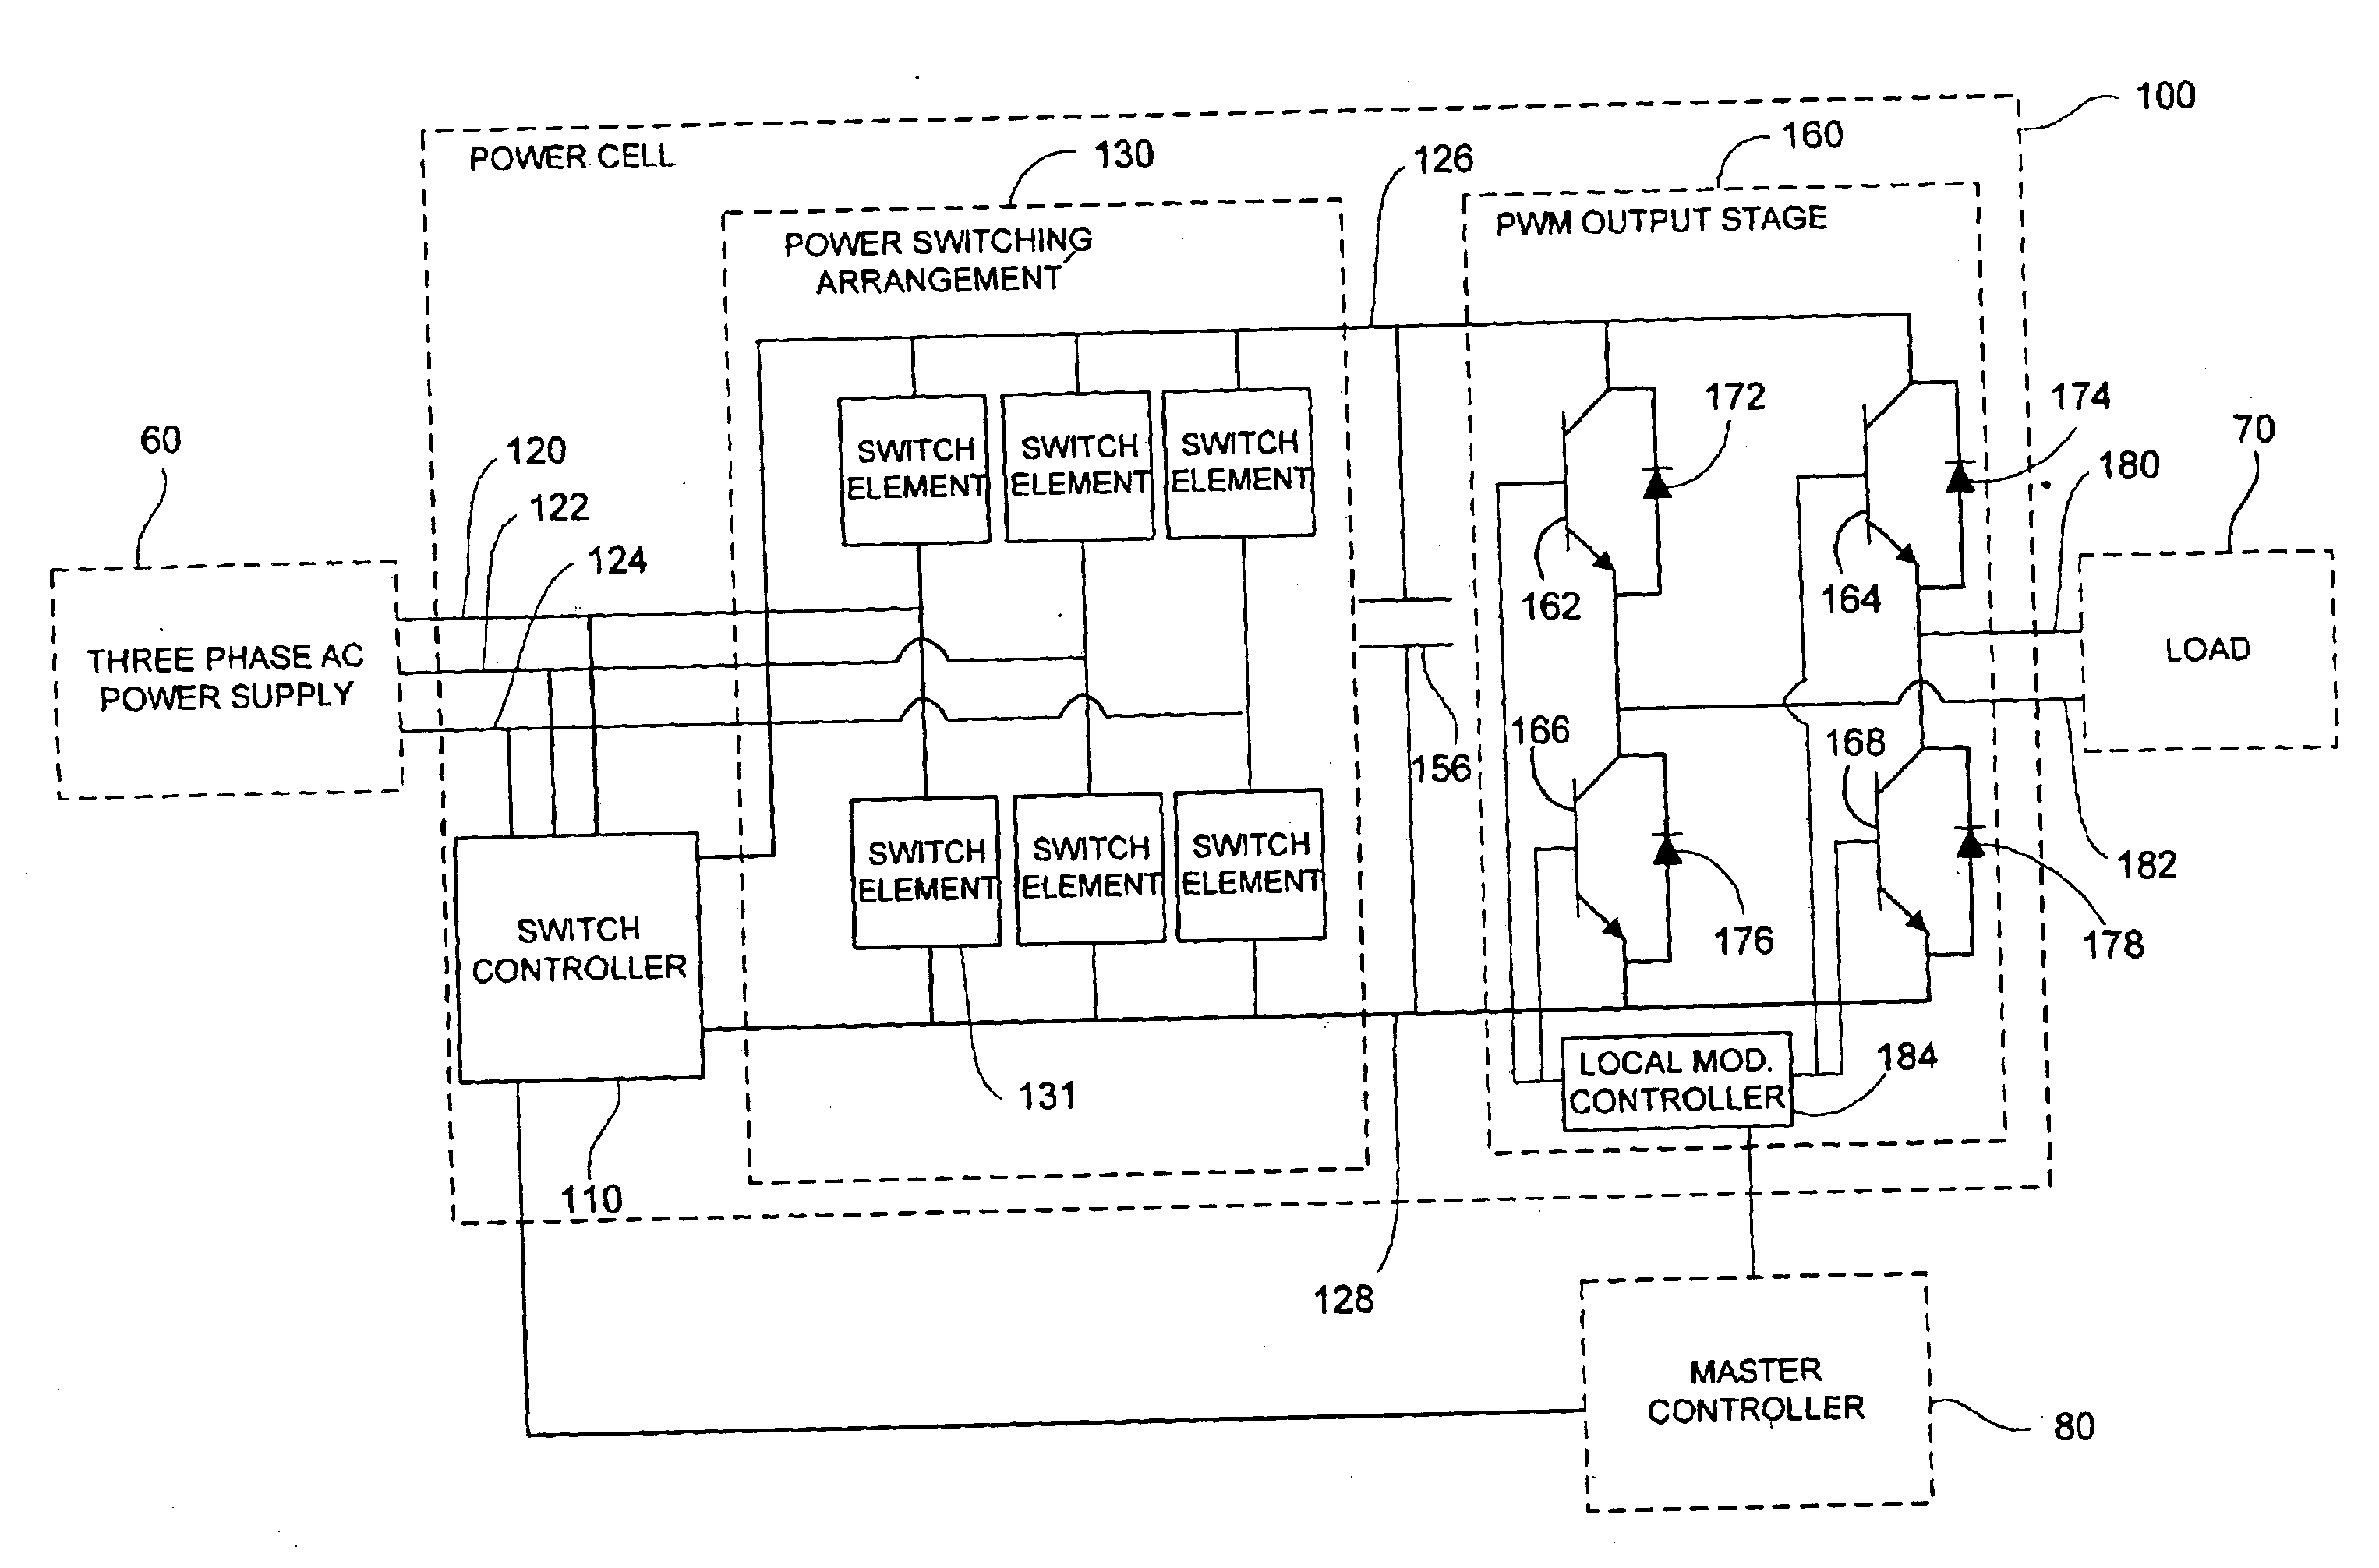 System and method for regenerative PWM AC power conversion